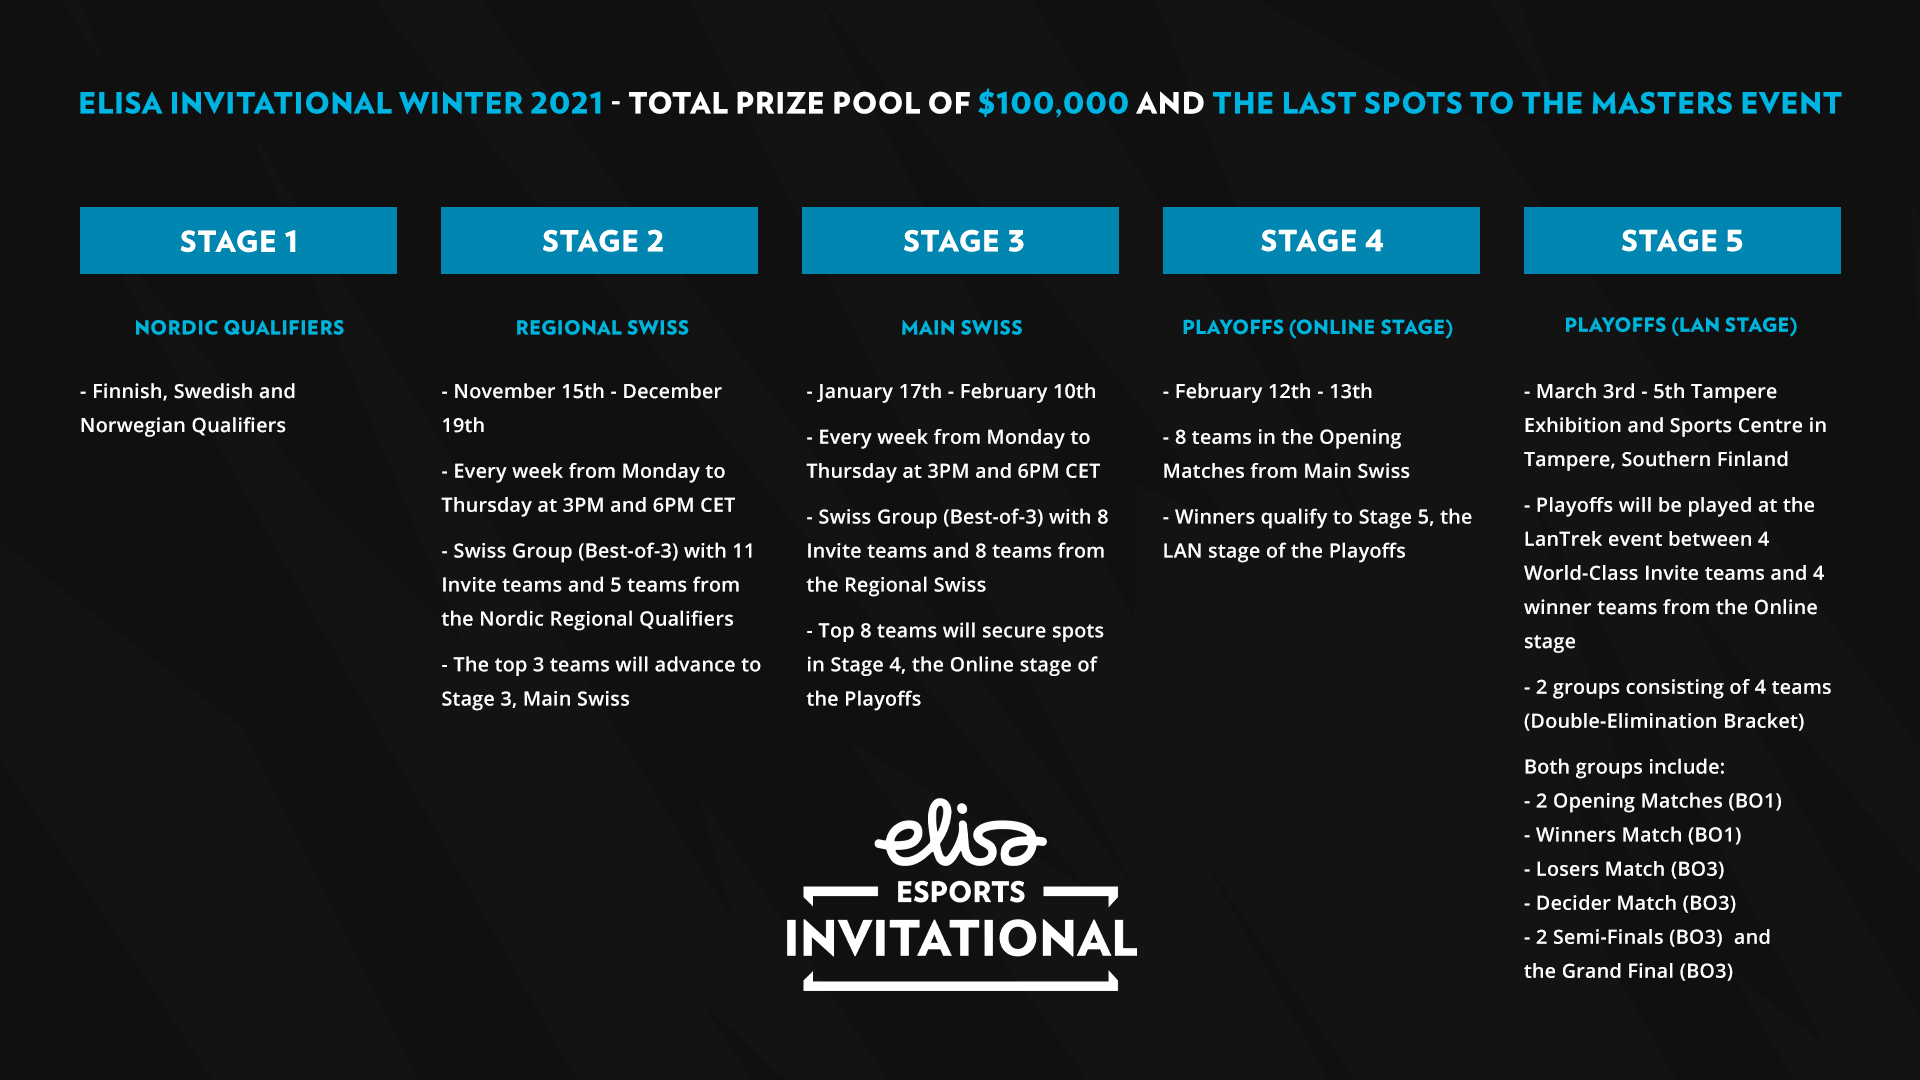 The Elisa Invitational Winter 2021 is here with a total Prize Pool of $100,000!